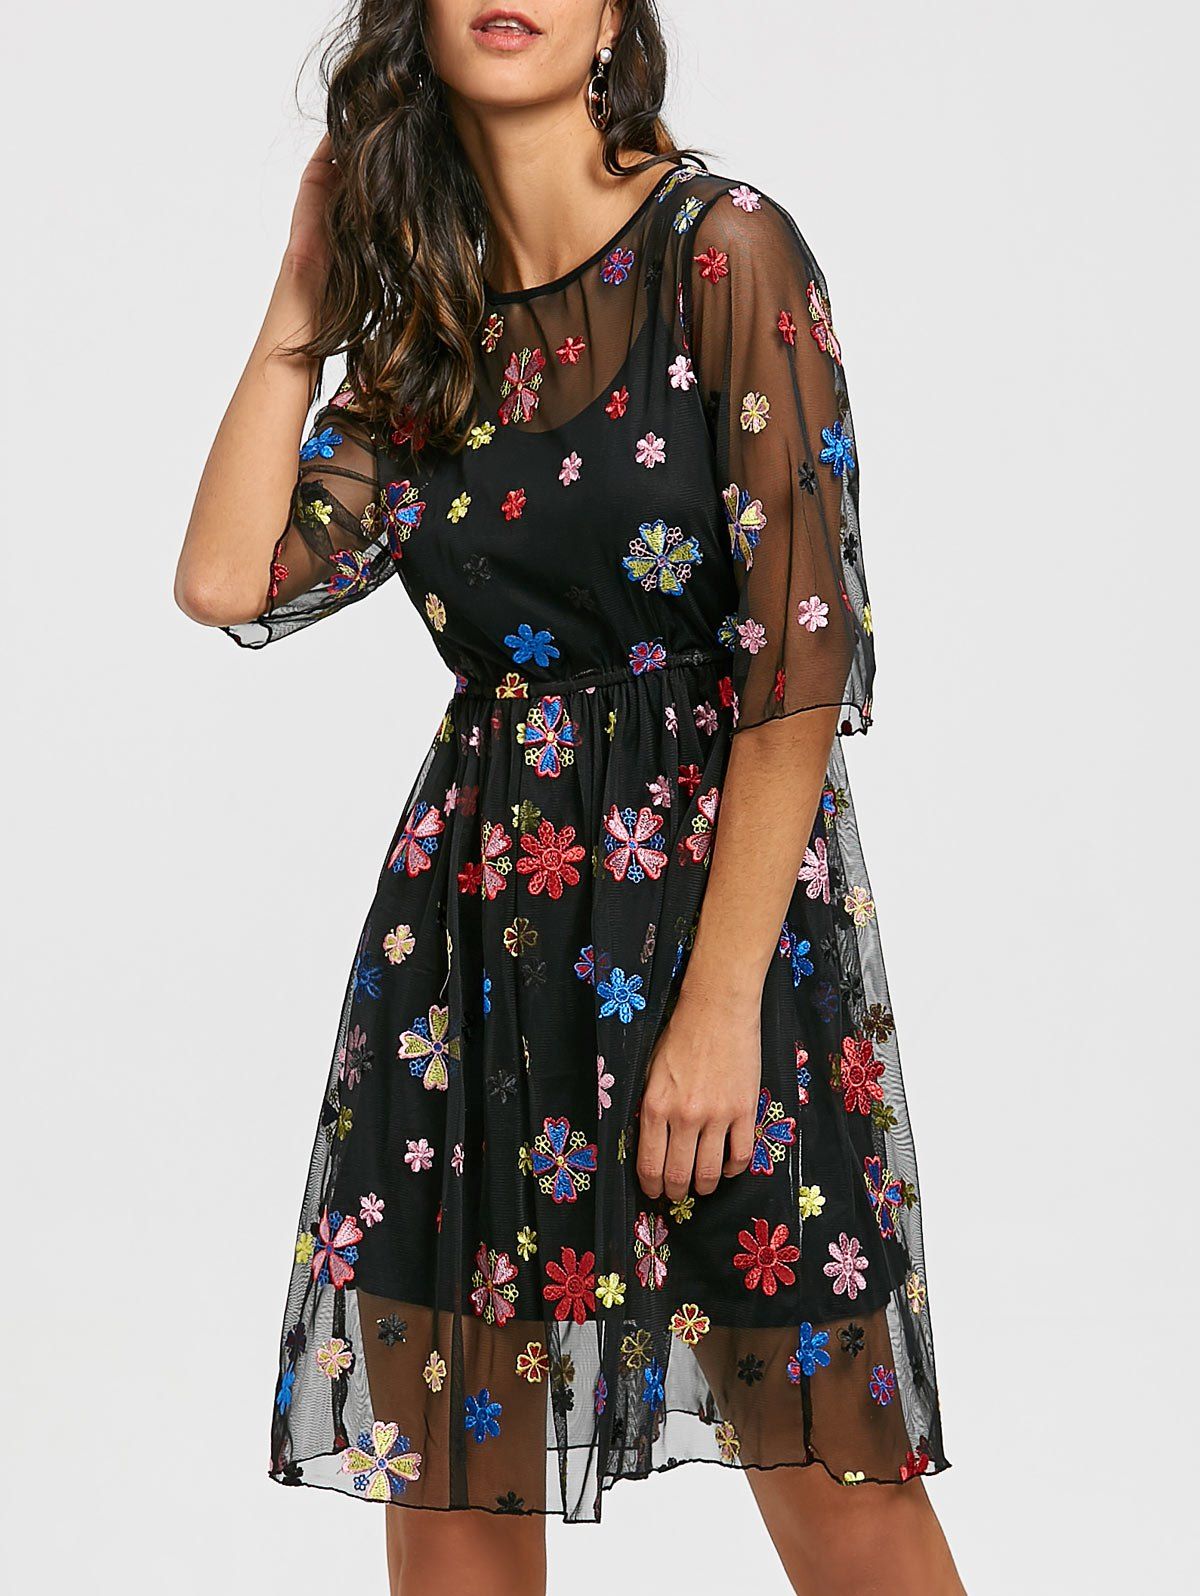 See Thru Embroidery Floral Dress and Cami Dress - BLACK L